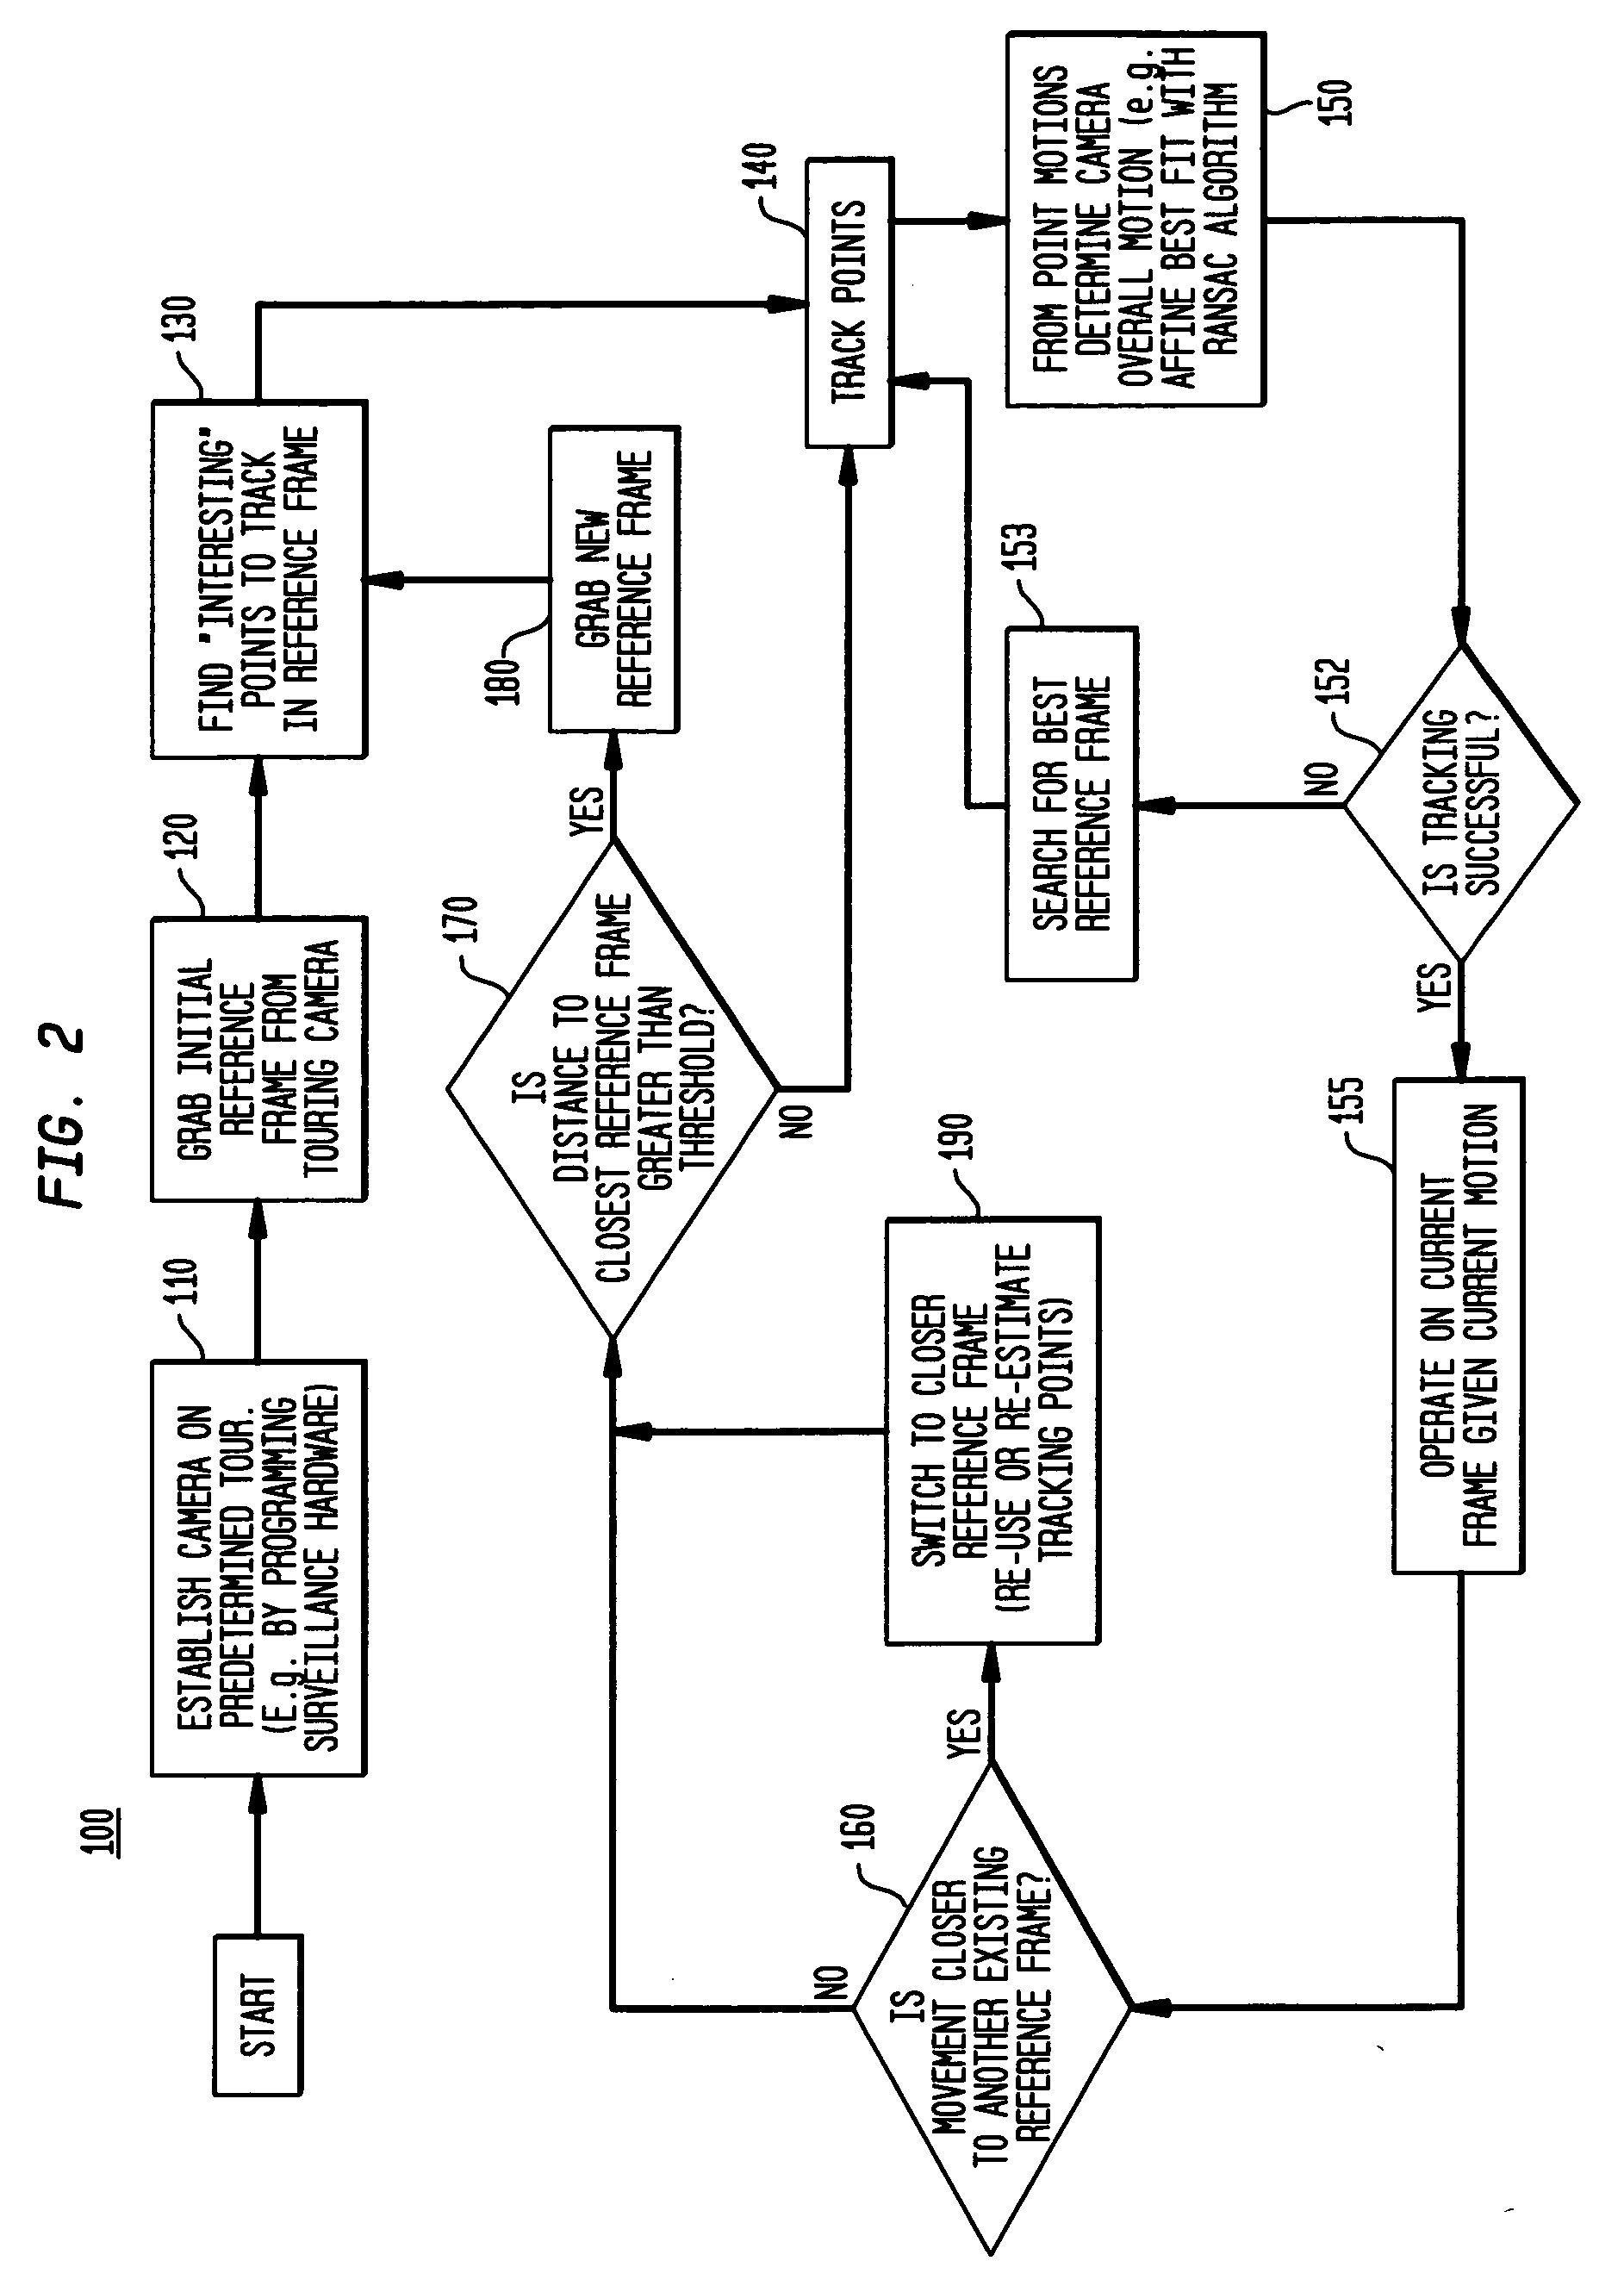 System and method for analyzing video from non-static camera